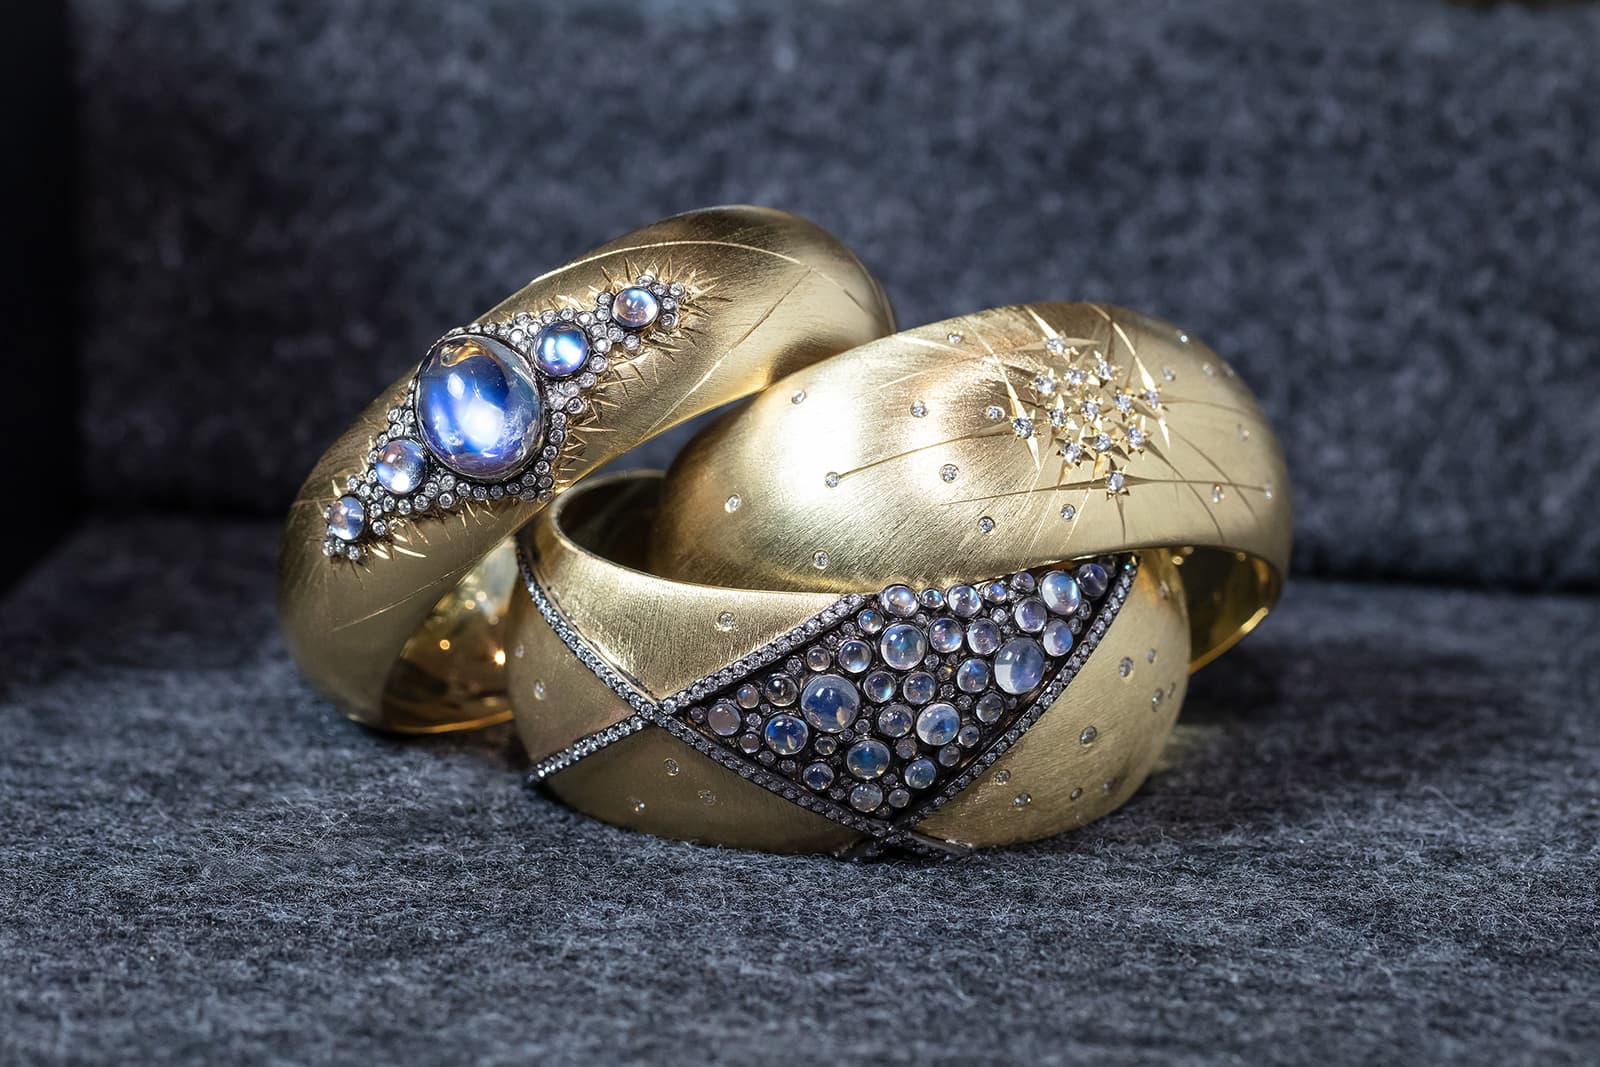 A trio of cuff bracelets from Adam Foster's Constellation Collection with diamonds and moonstones